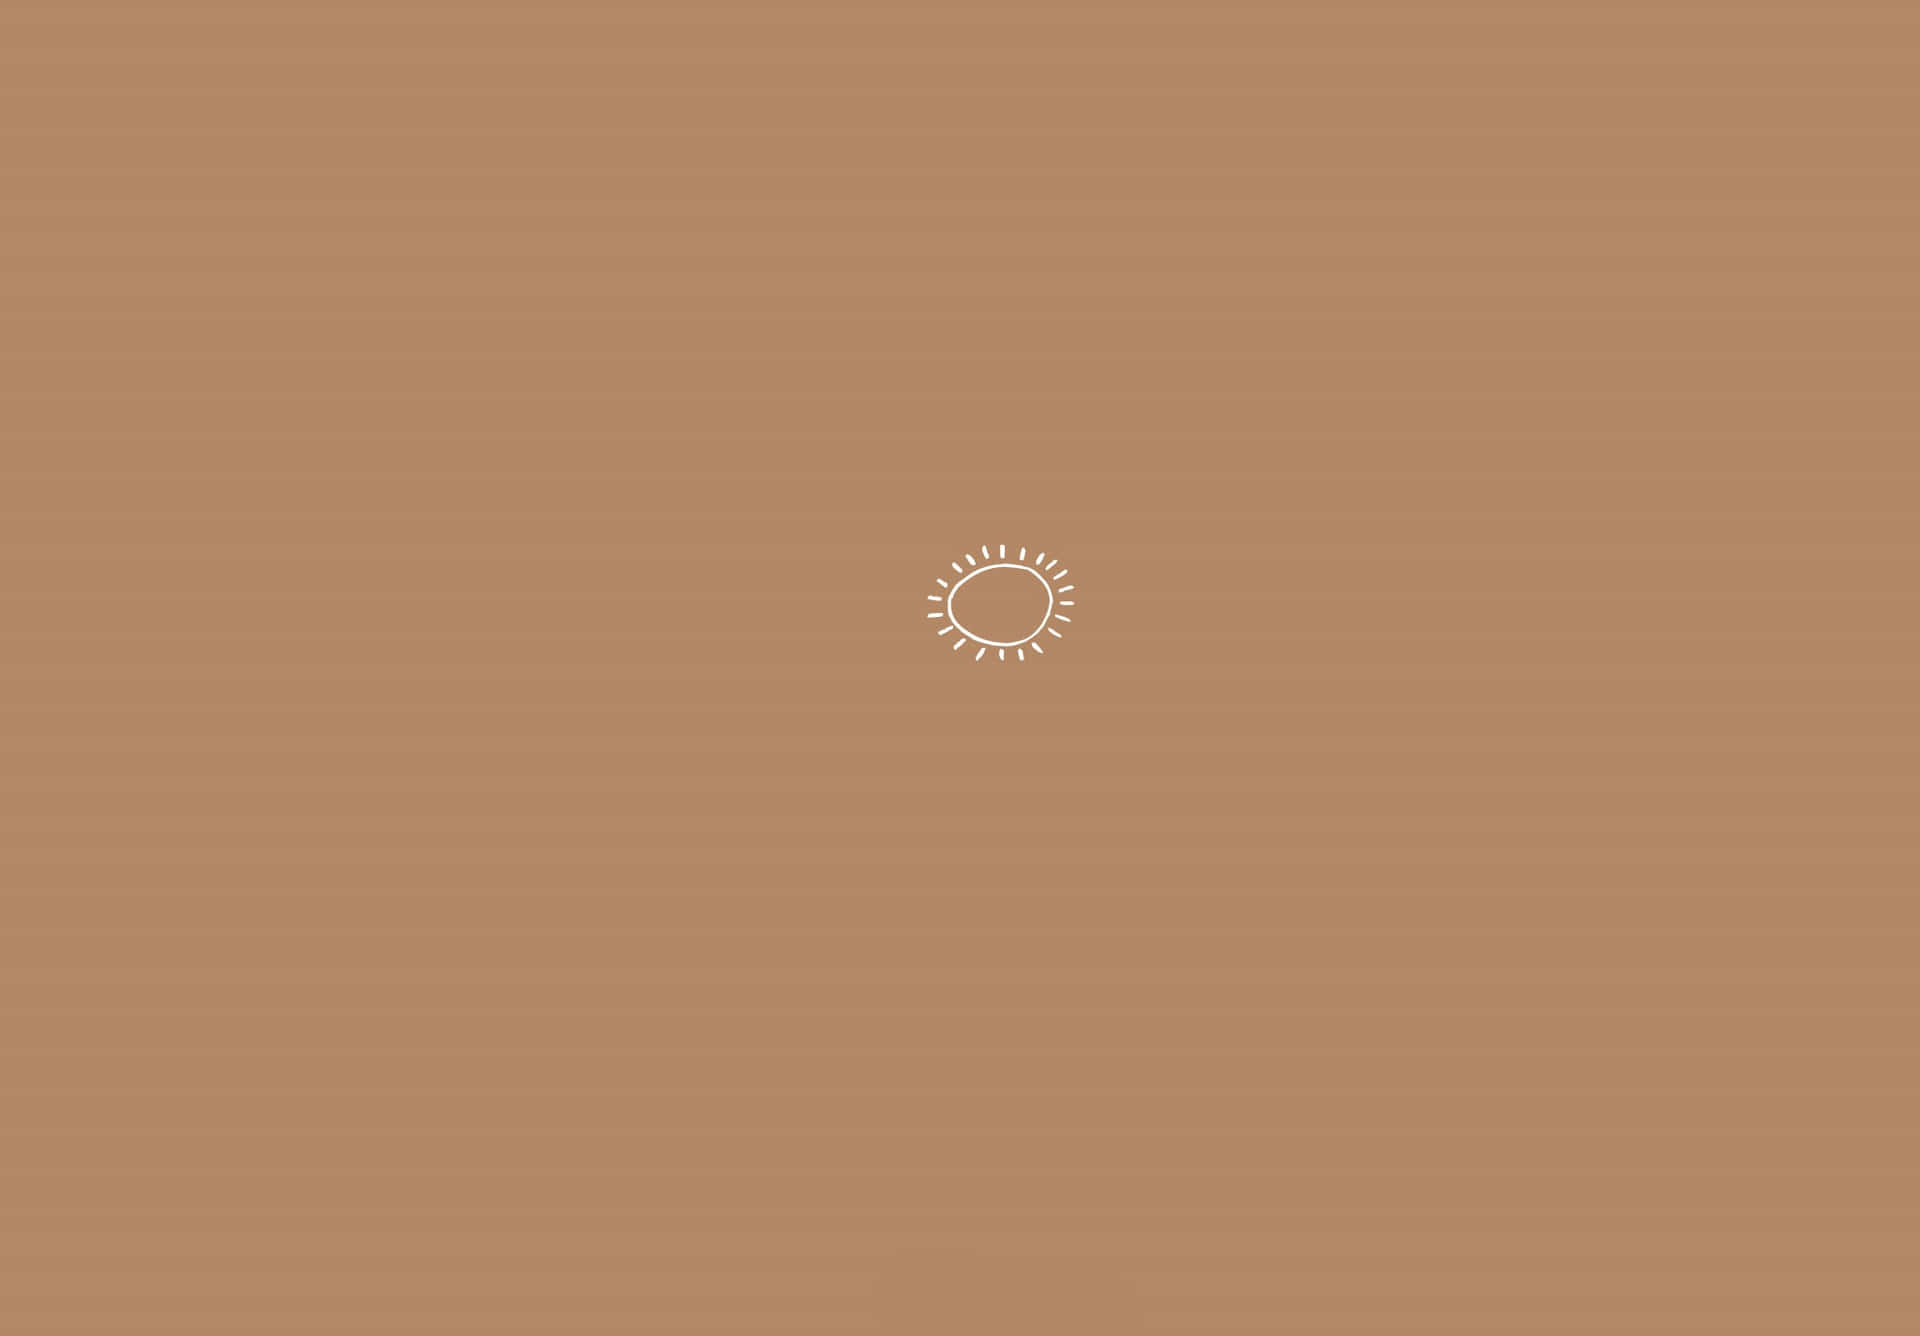 A Brown Background With A Sun On It